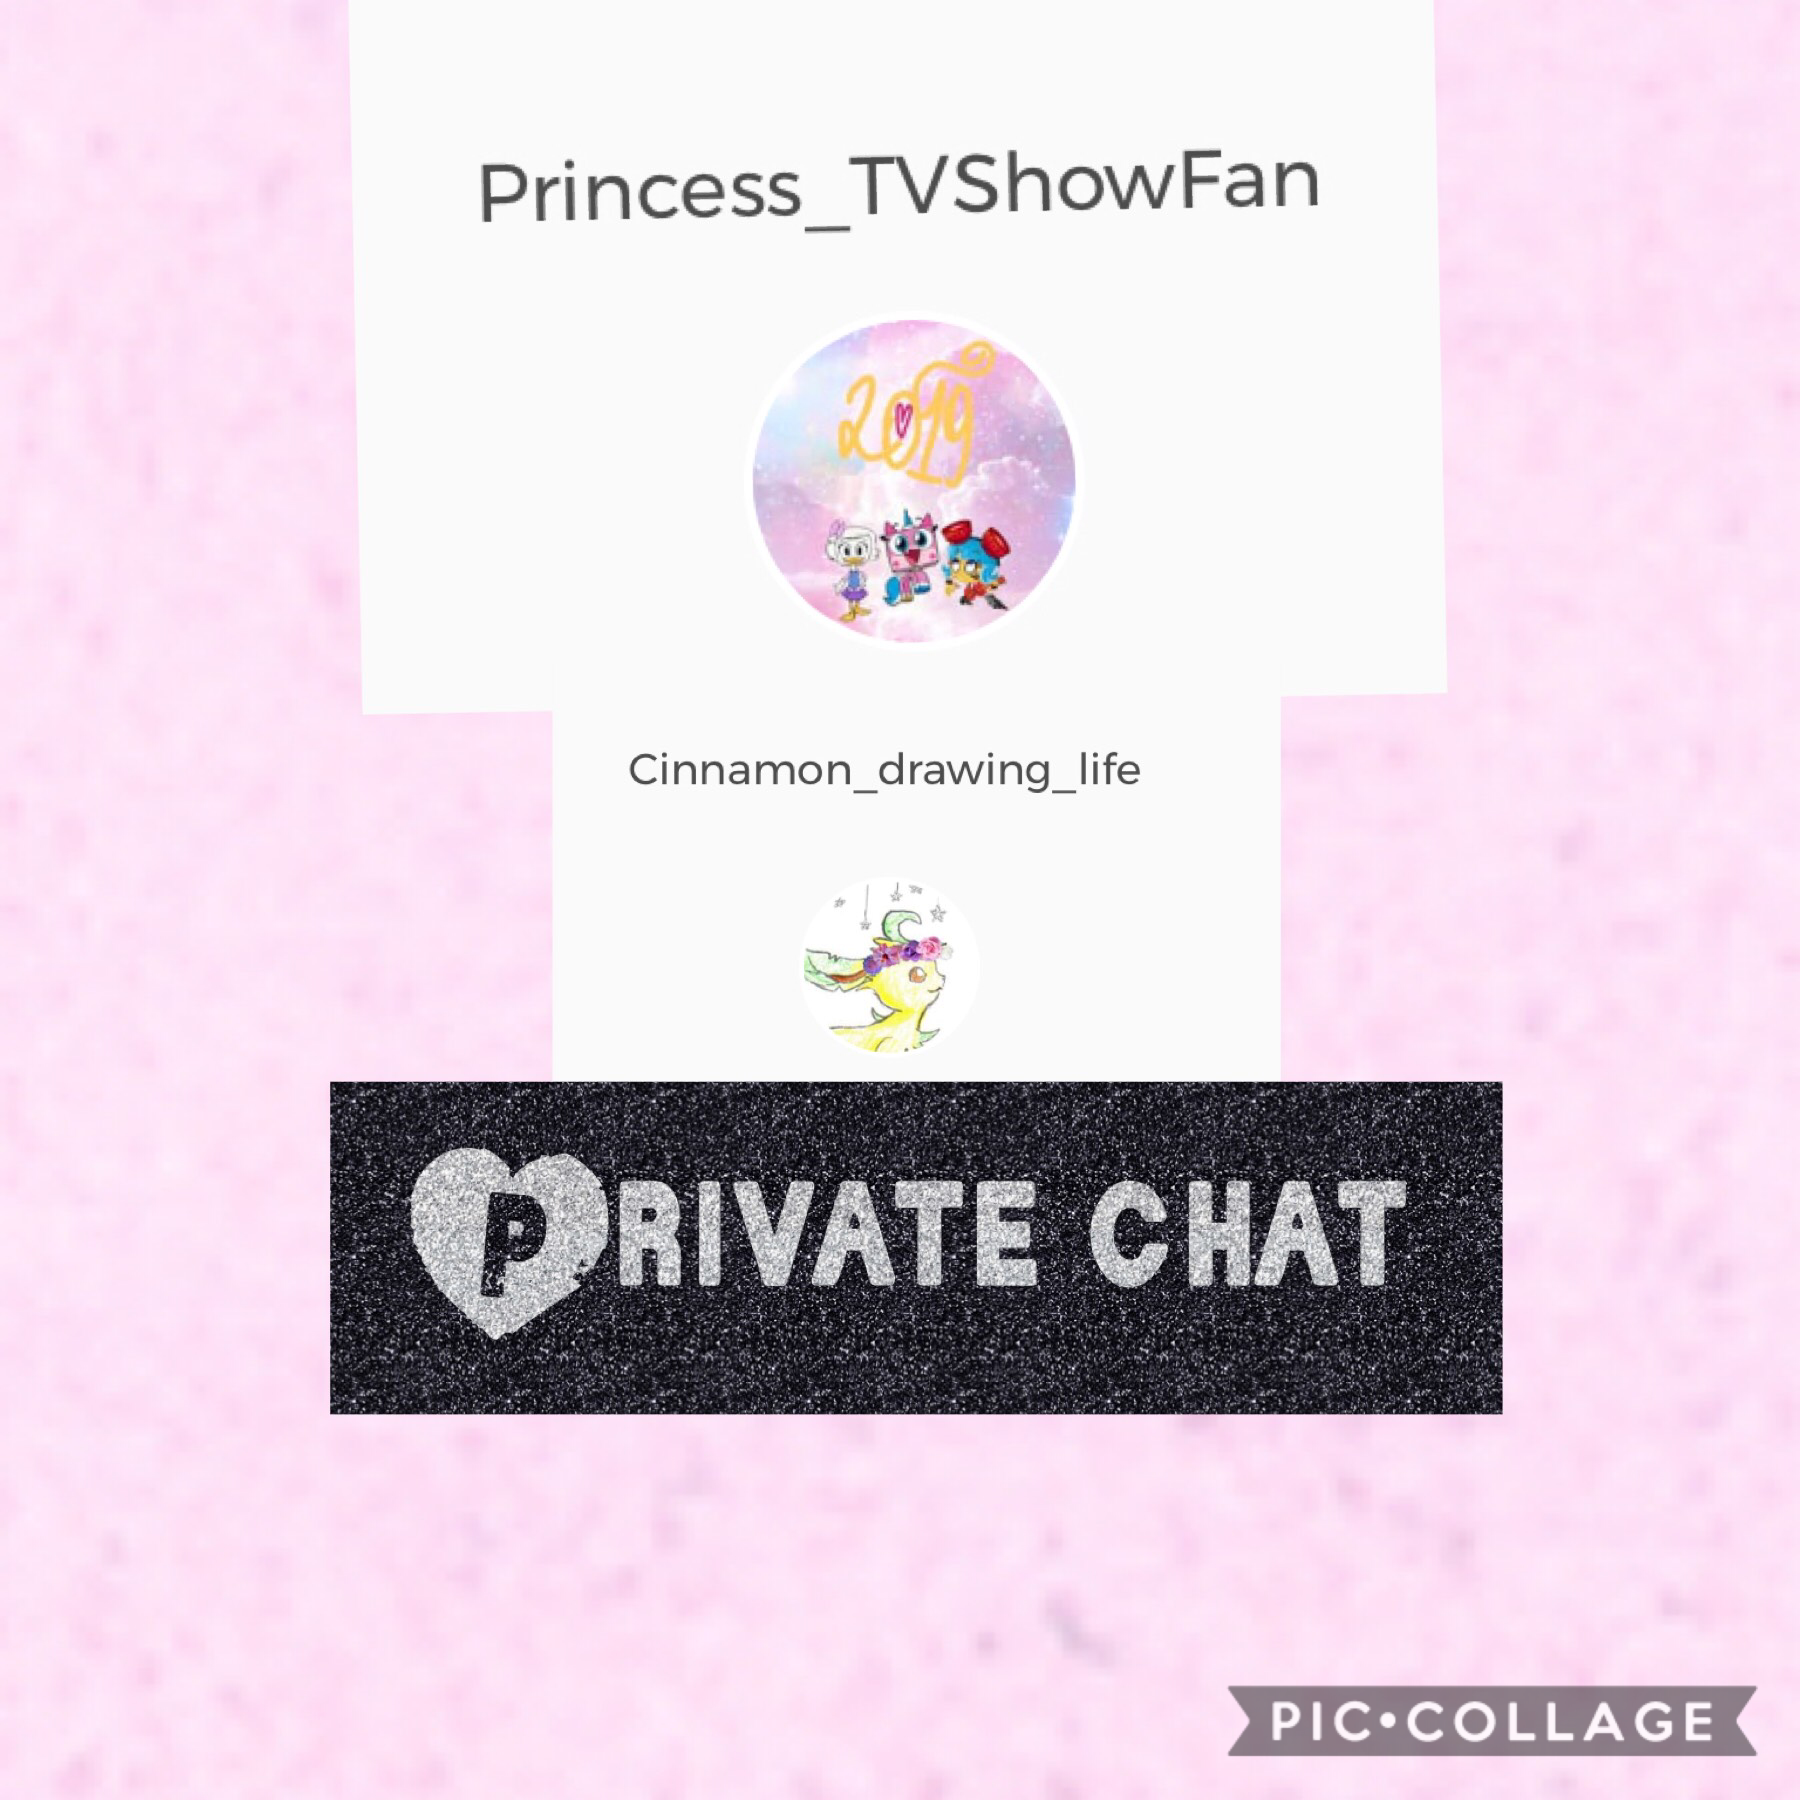 Private chat don’t snoop